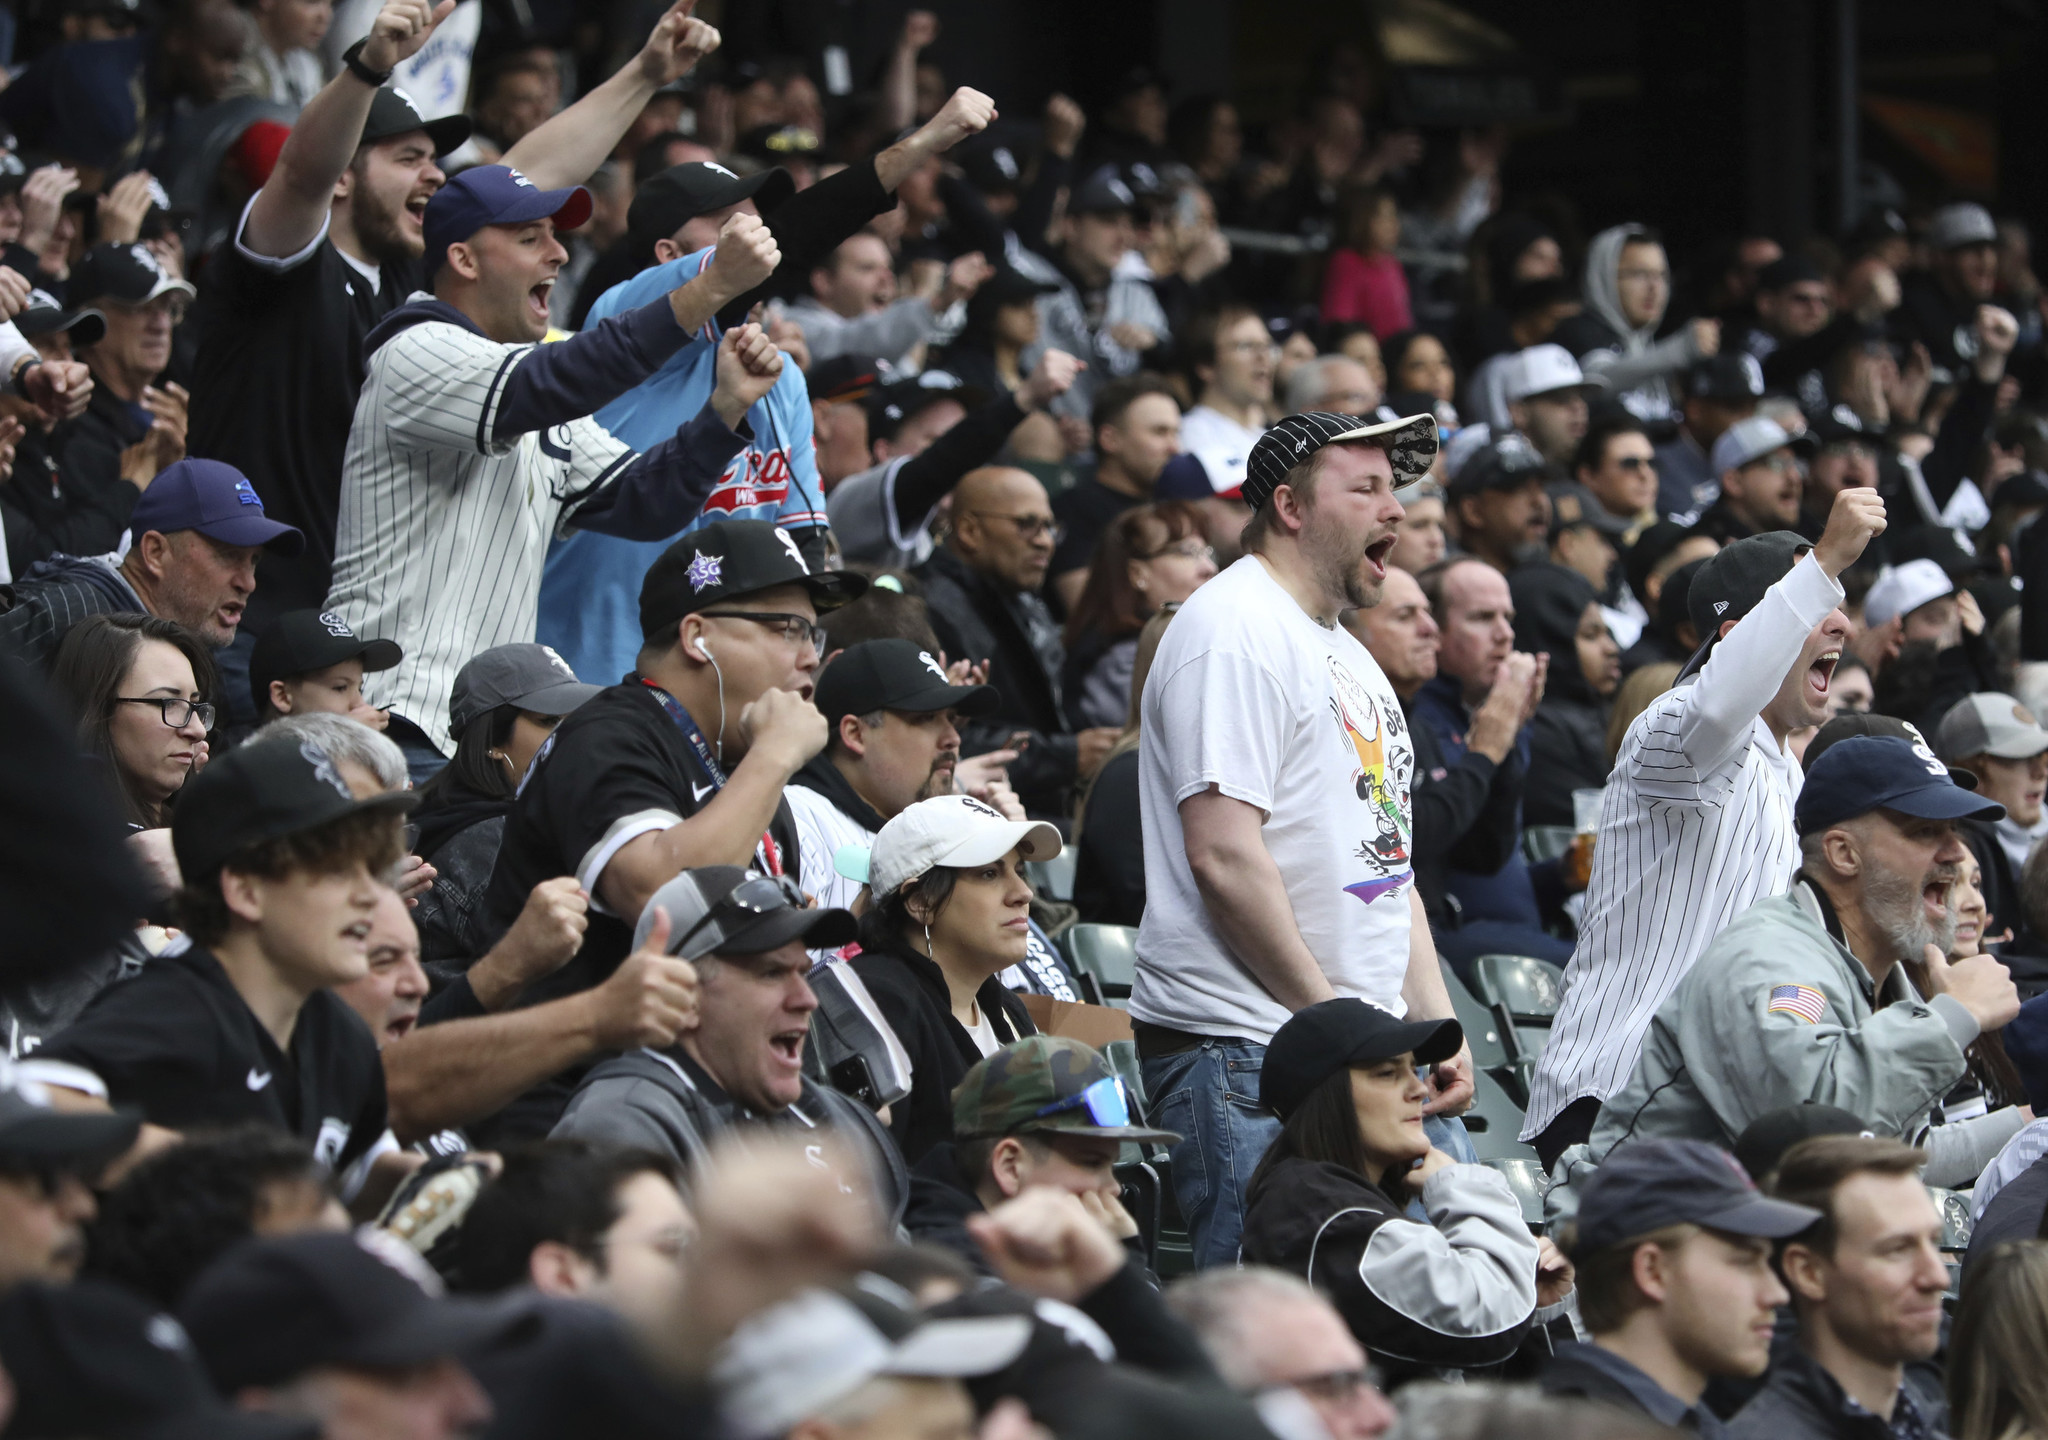 Column: Buzz builds for Chicago White Sox fans in home opener